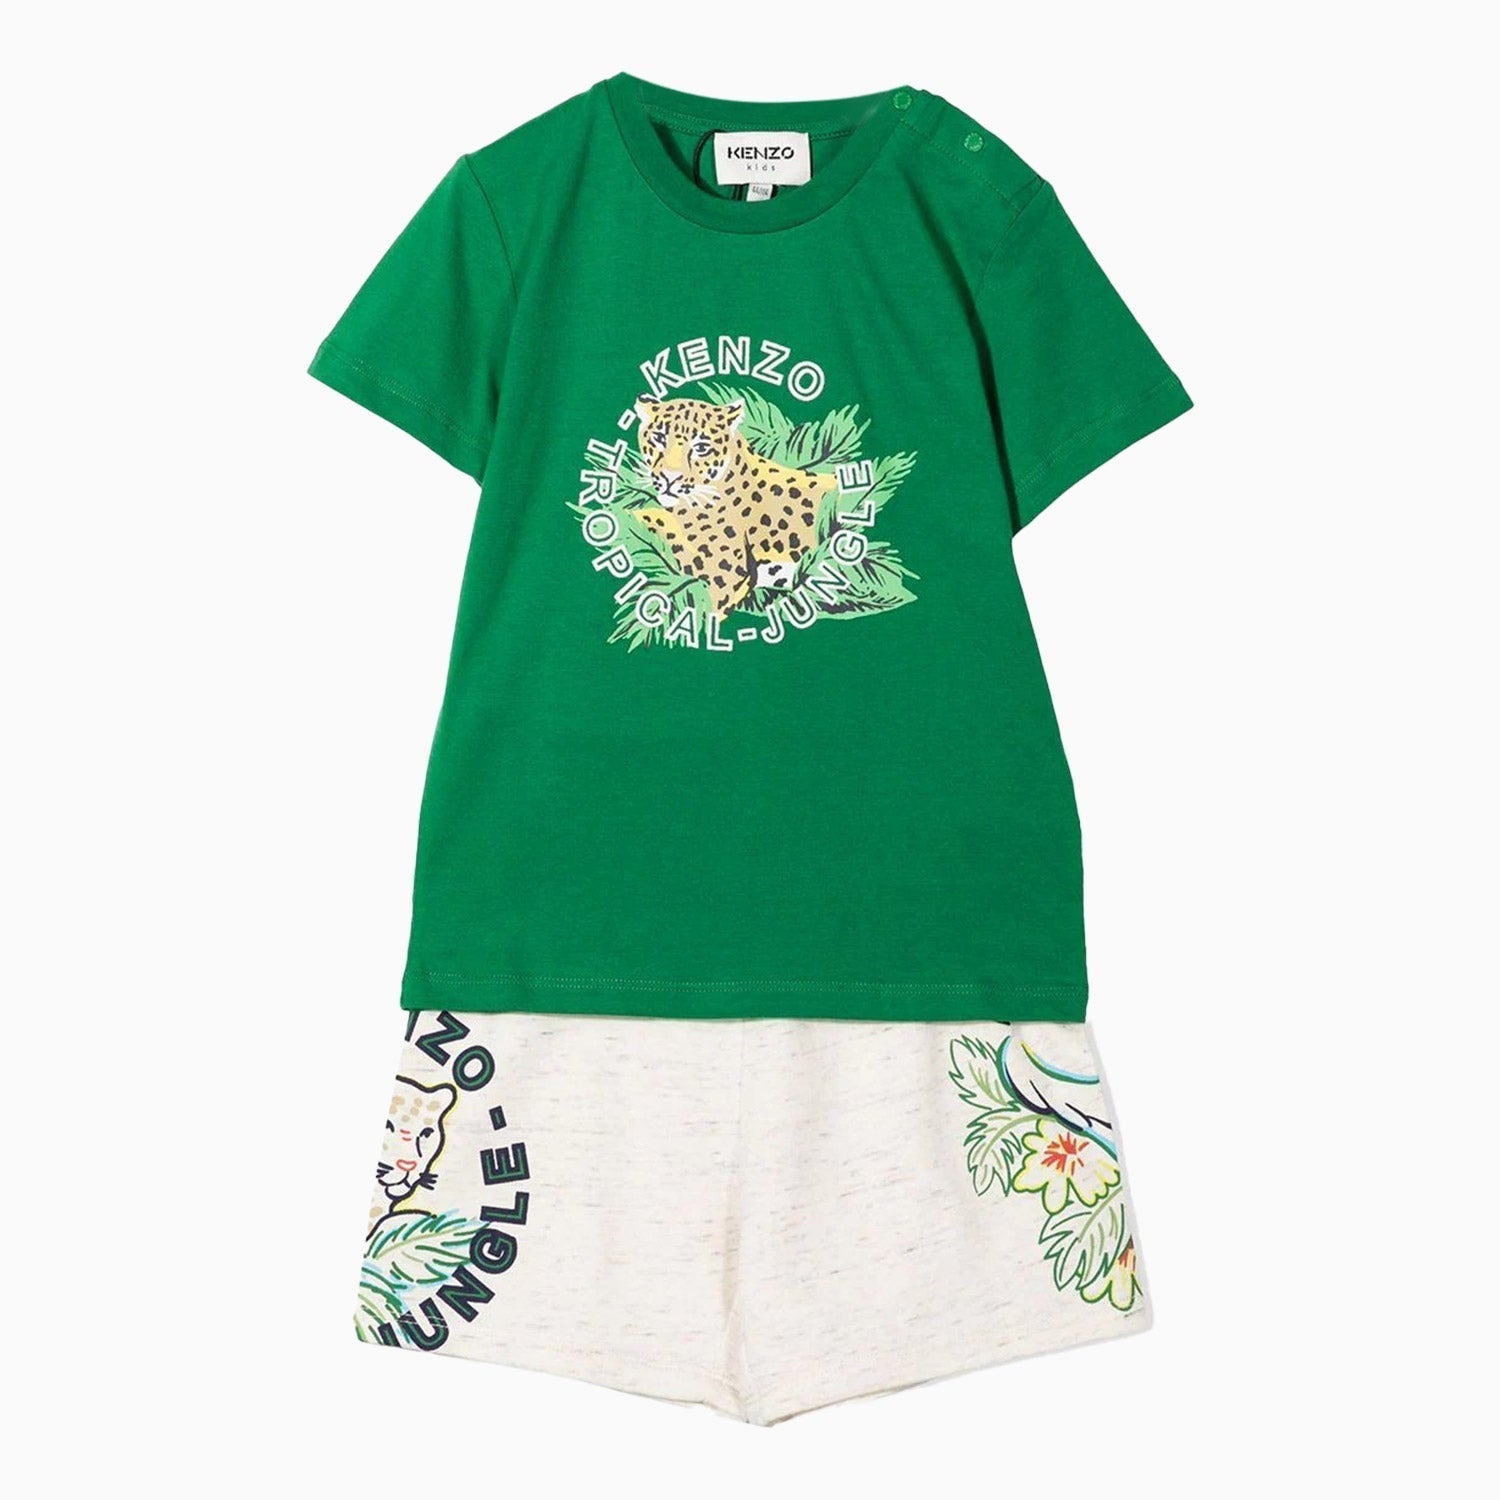 Kenzo Kid's Tropical Jungle Outfit Toddlers - Color: Green - Kids Premium Clothing -